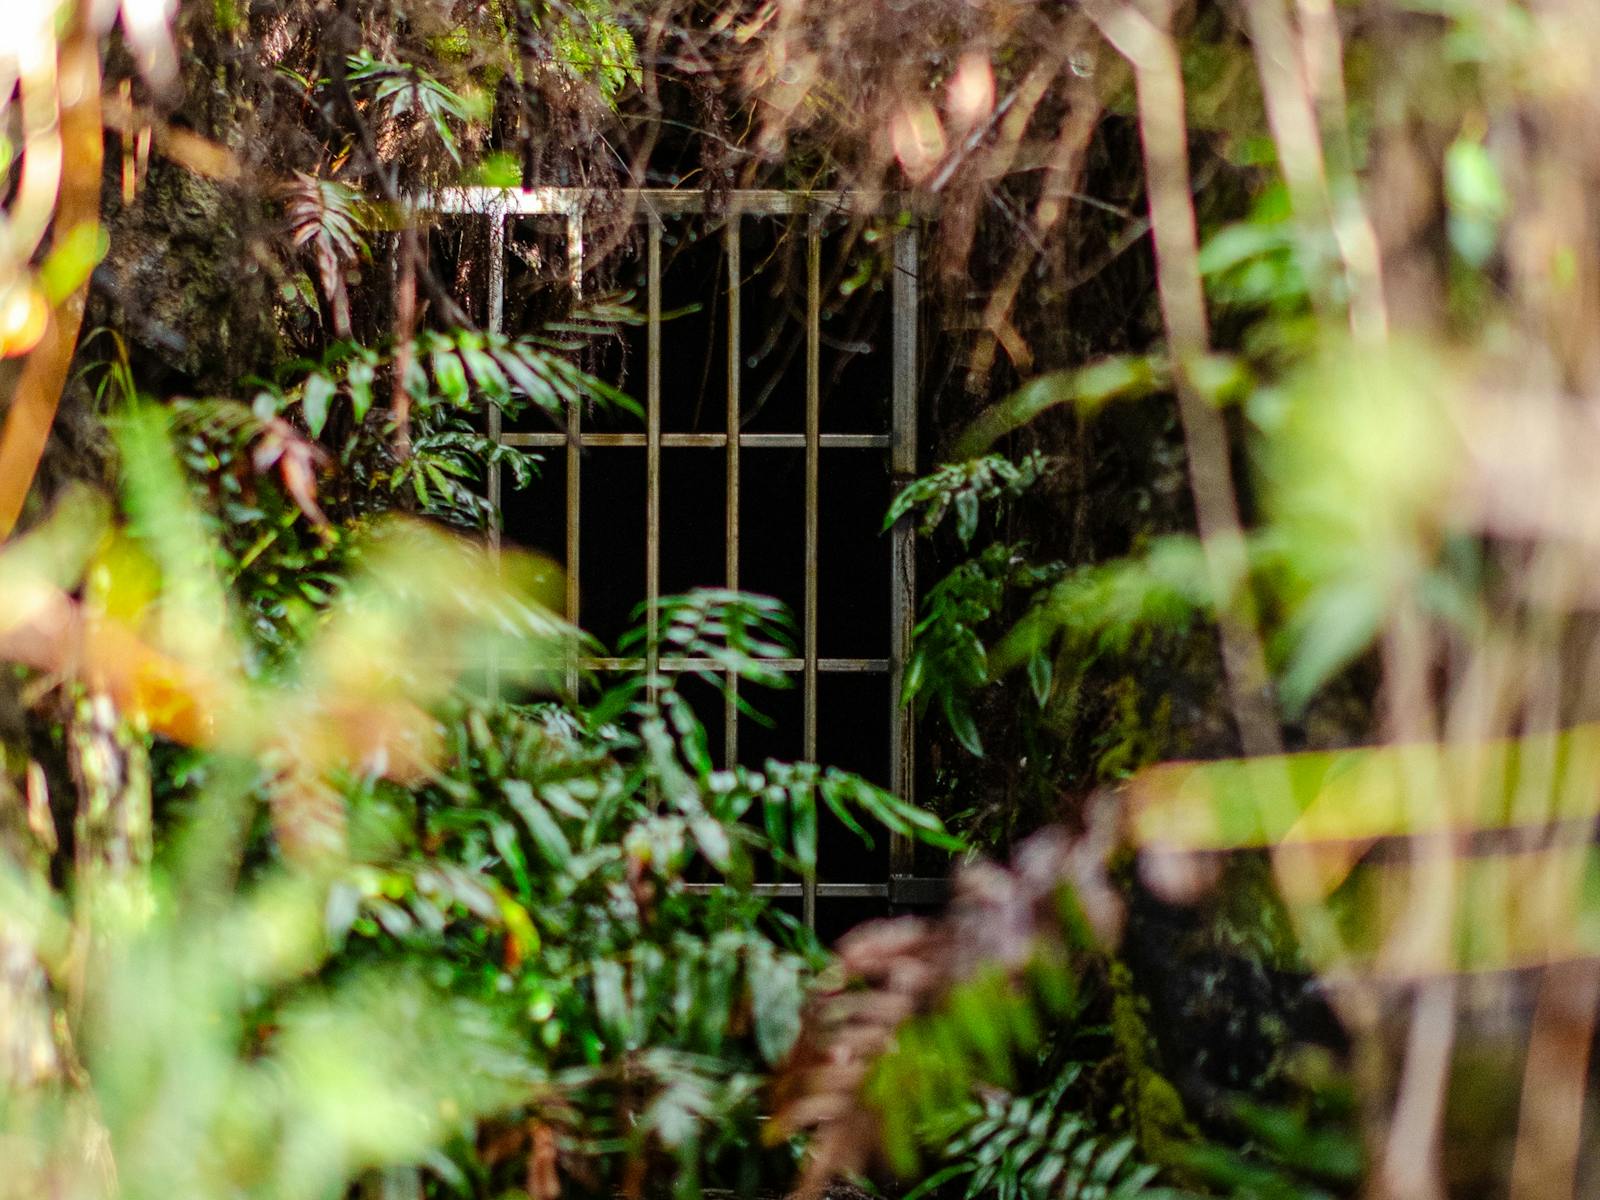 A view of a gated tunnel entrance through mixed foliage